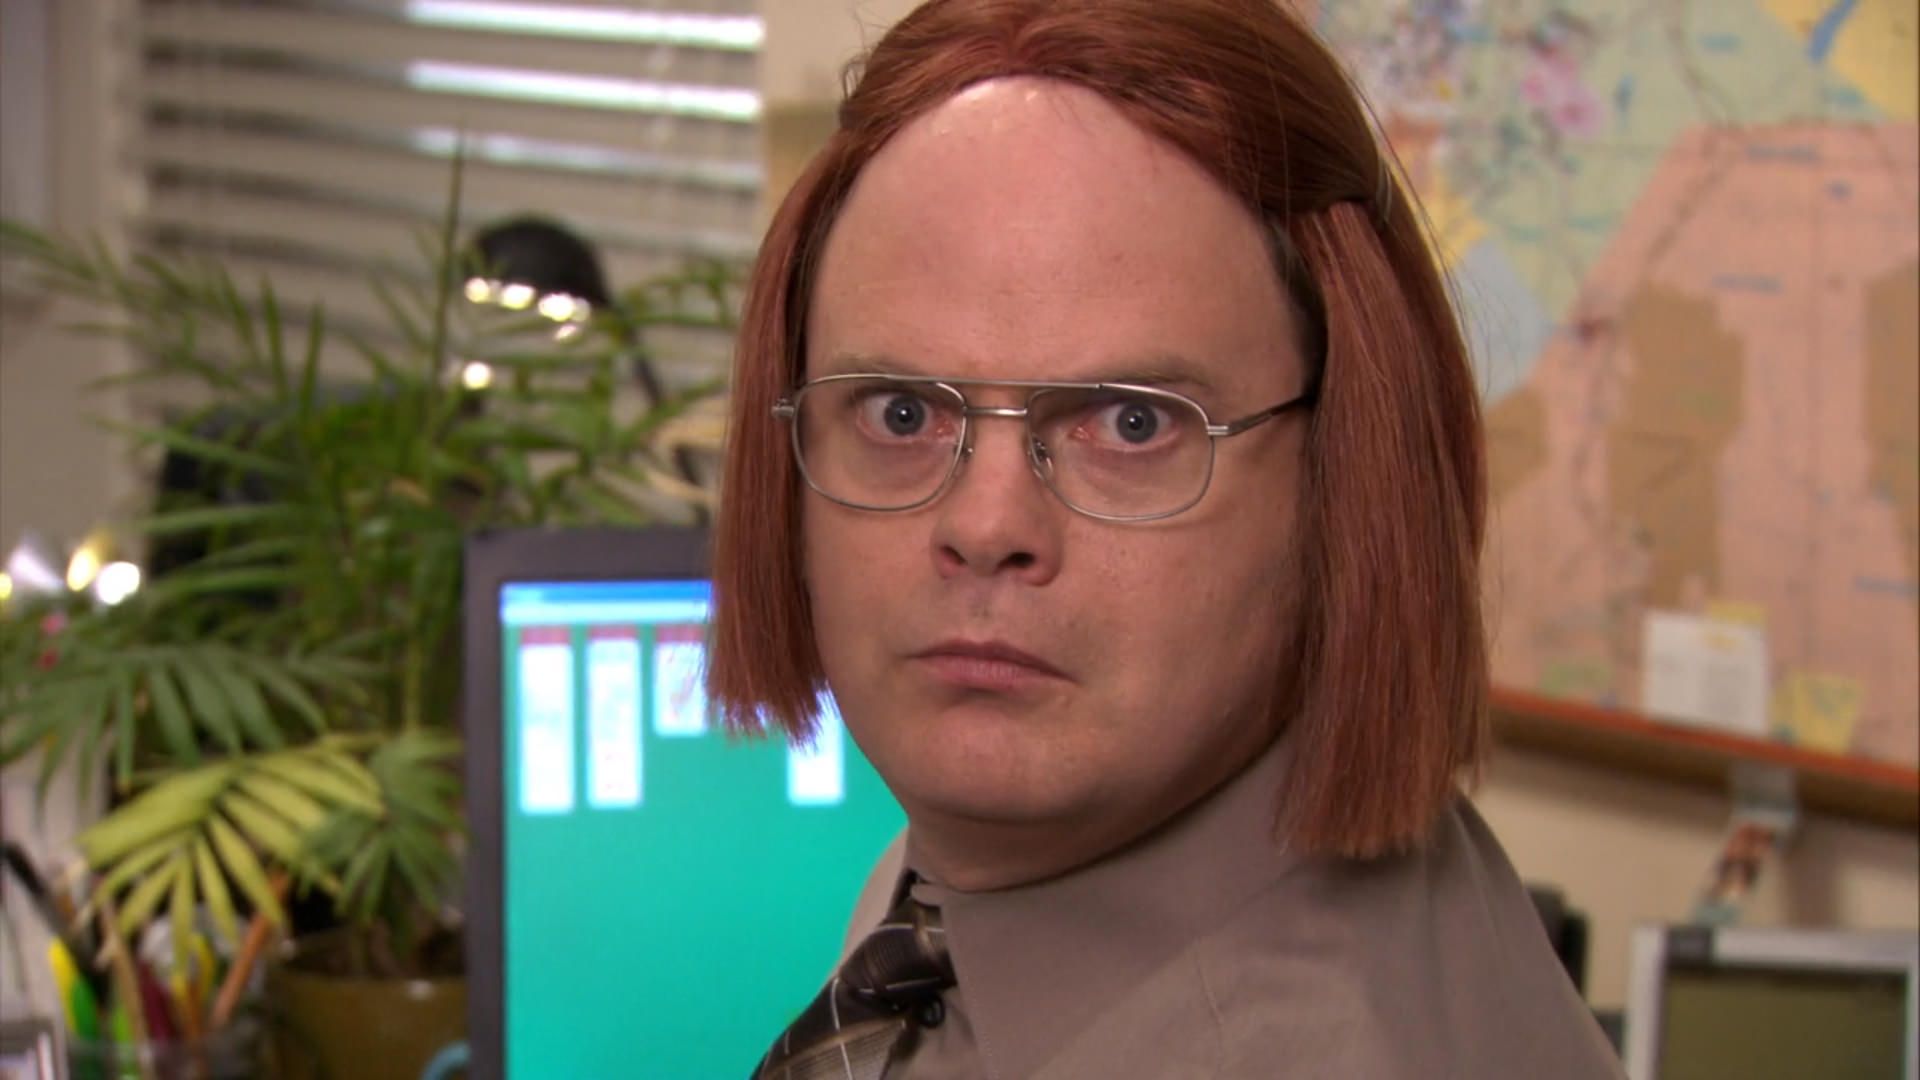 The Office Costumes